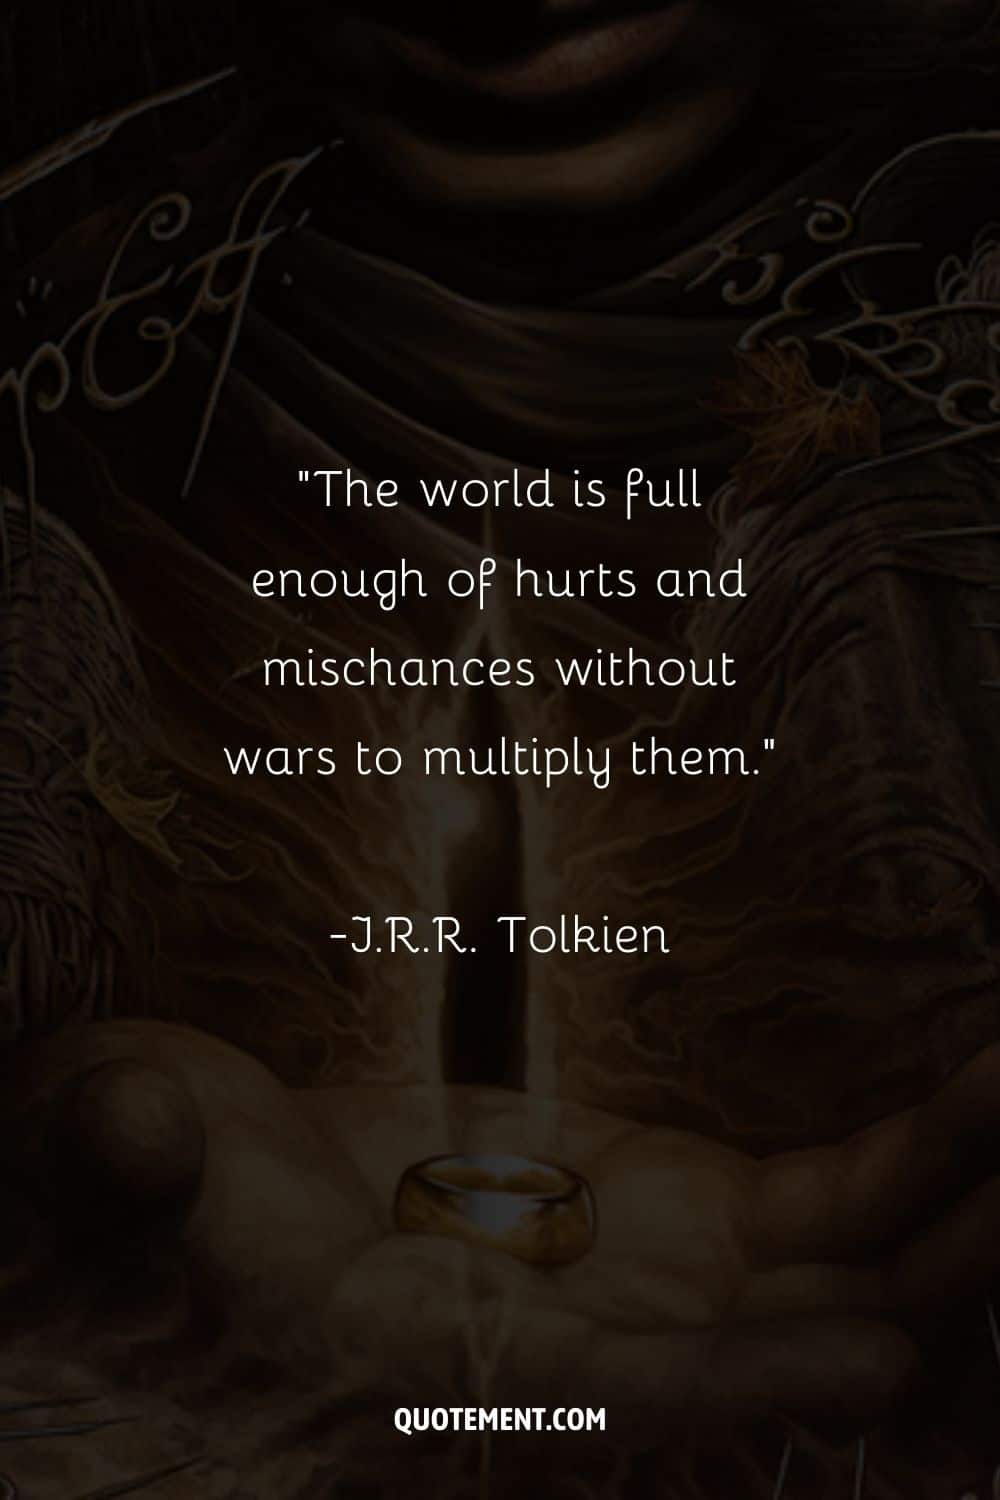 The world is full enough of hurts and mischances without wars to multiply them